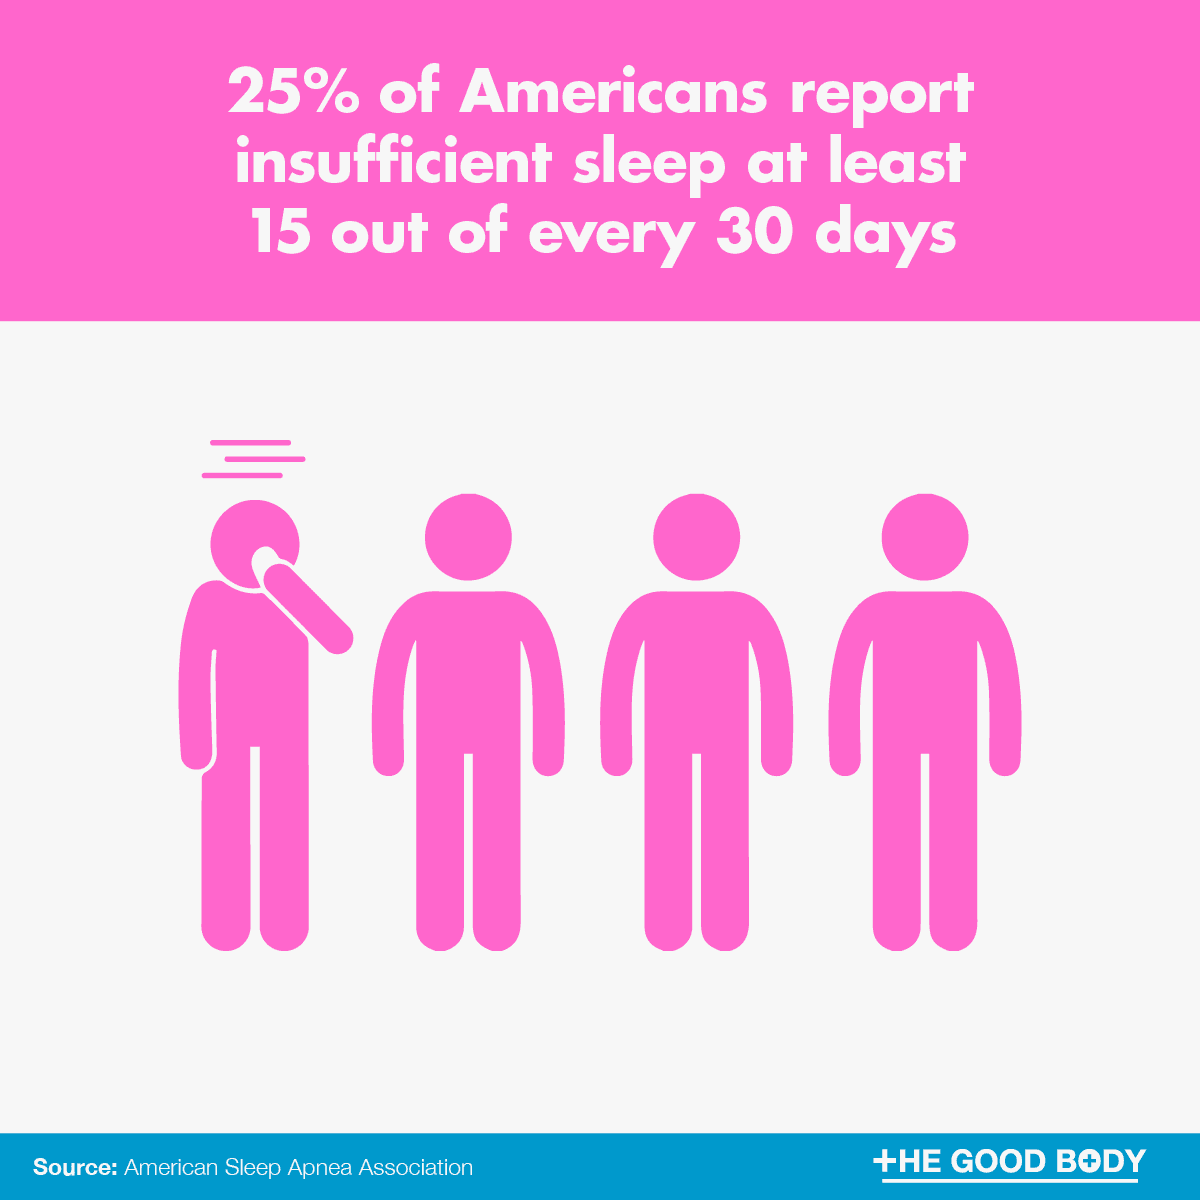 25% of Americans report insufficient sleep at least 15 out of every 30 days